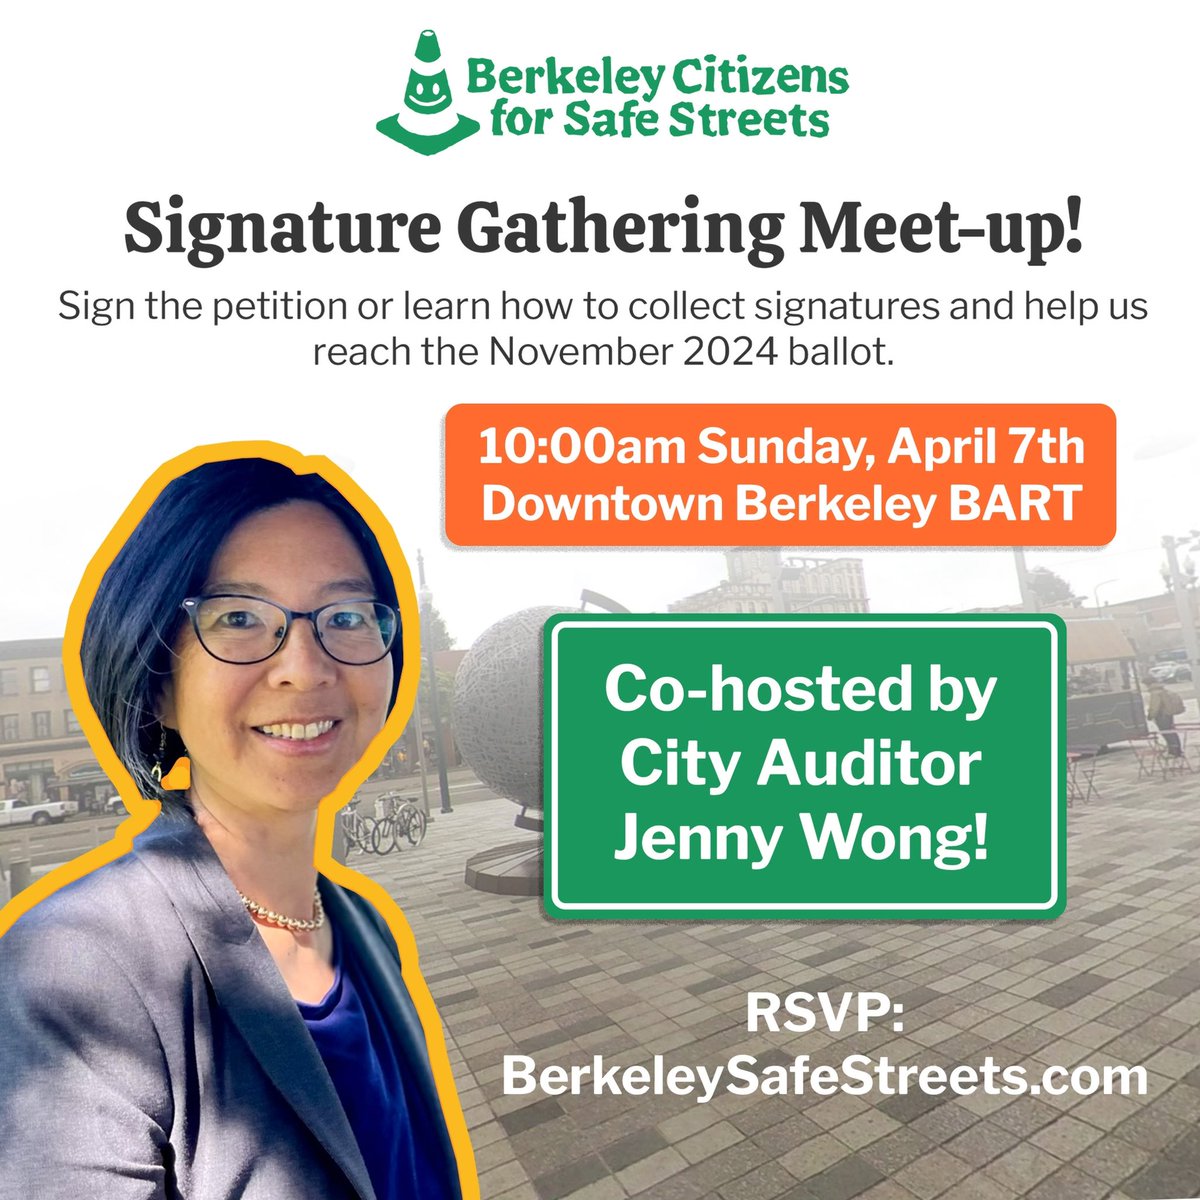 We are excited to announce a signature gathering meet-up with @JennyTheAuditor! Join us Sunday 4/7 at 10:00am for coffee and signature canvassing for smoother, safer streets 🚧